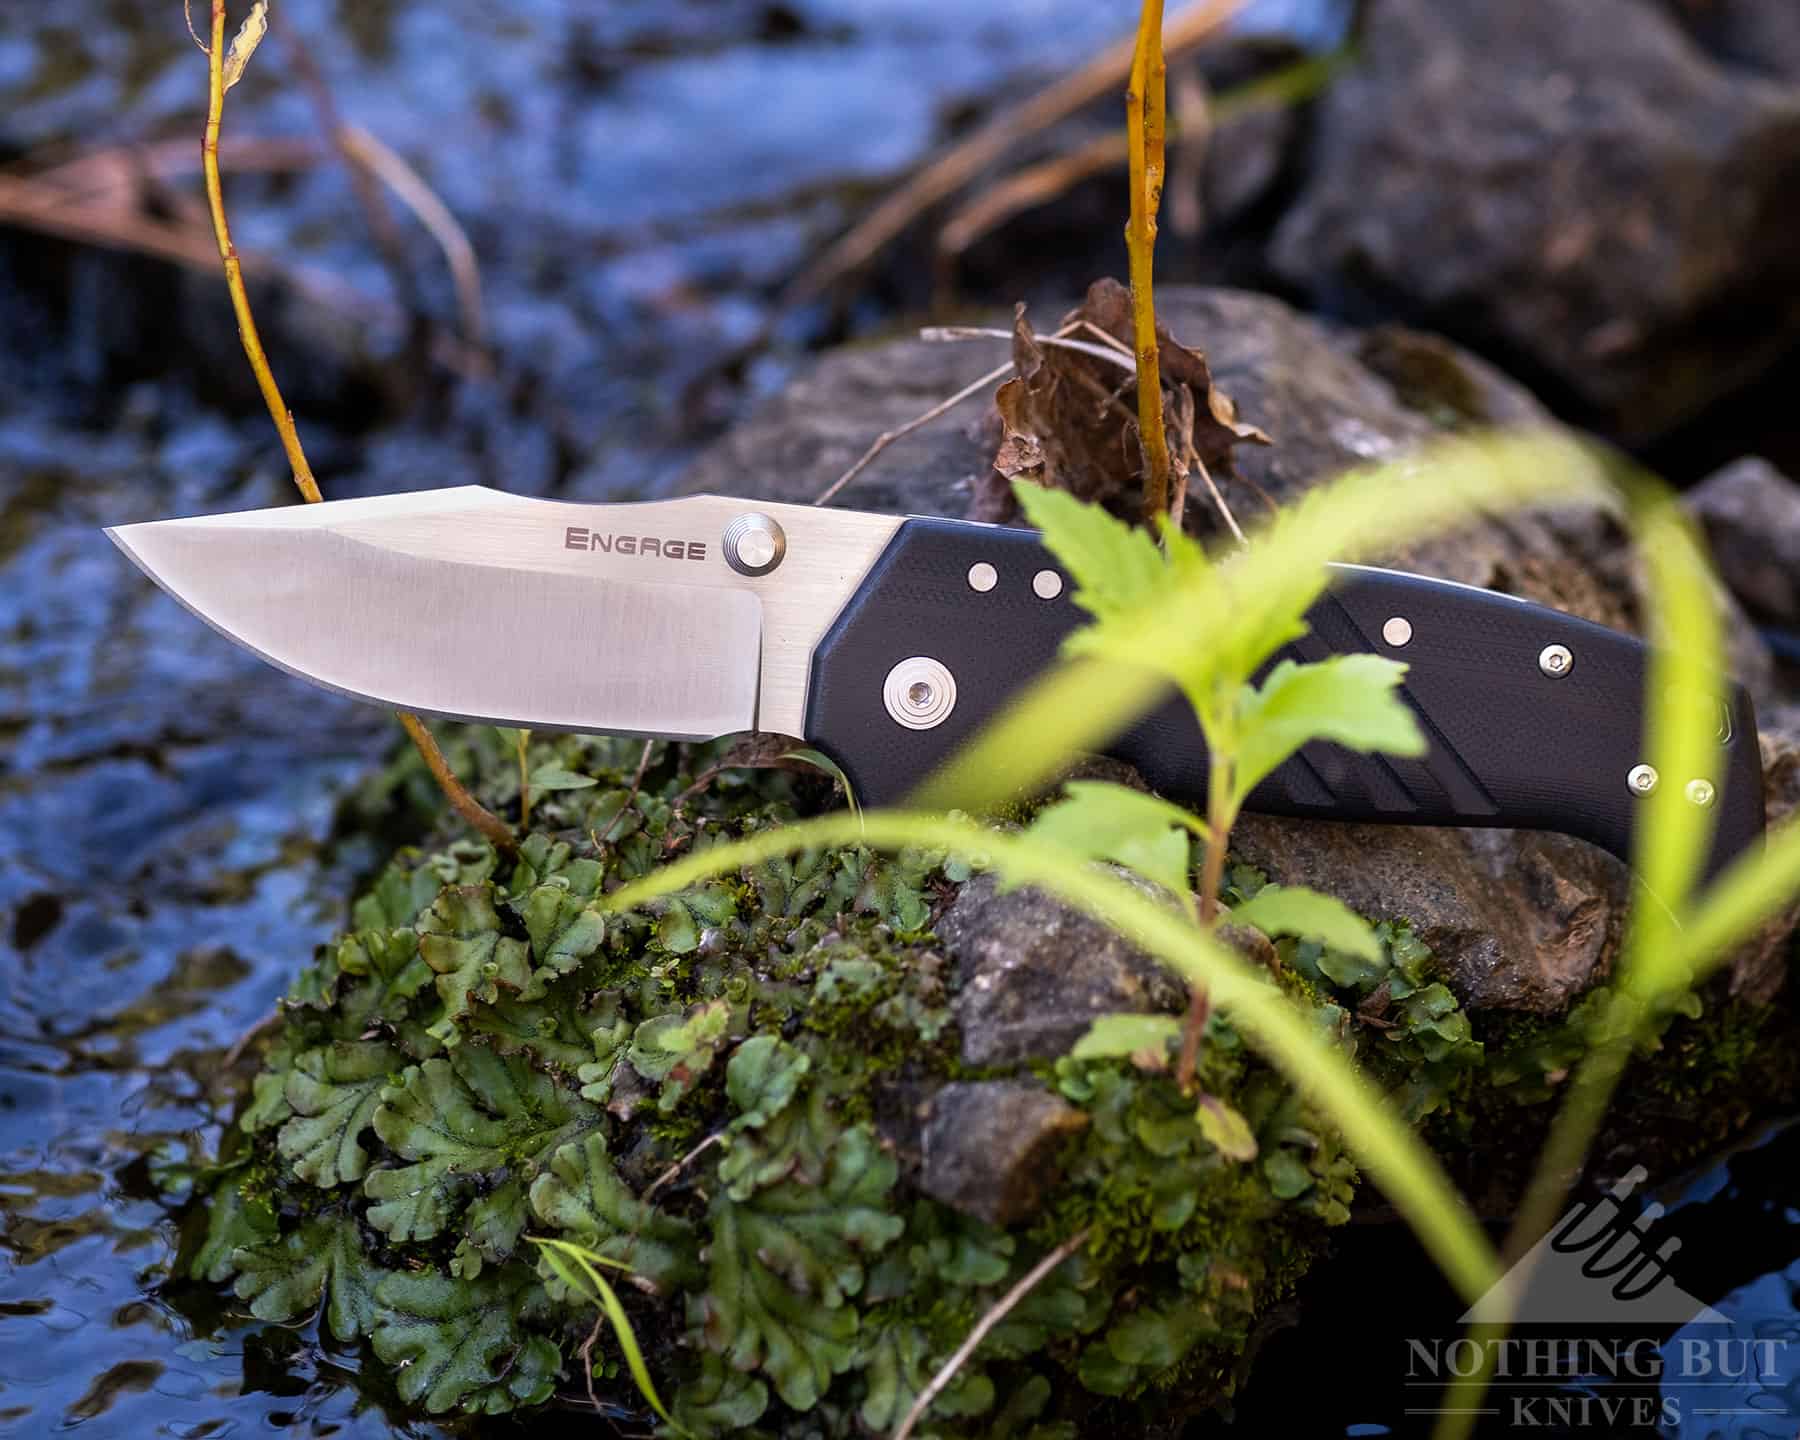 The Cold Steel Engage is a great choice for a camping, hiking or hard use pocket knife. 